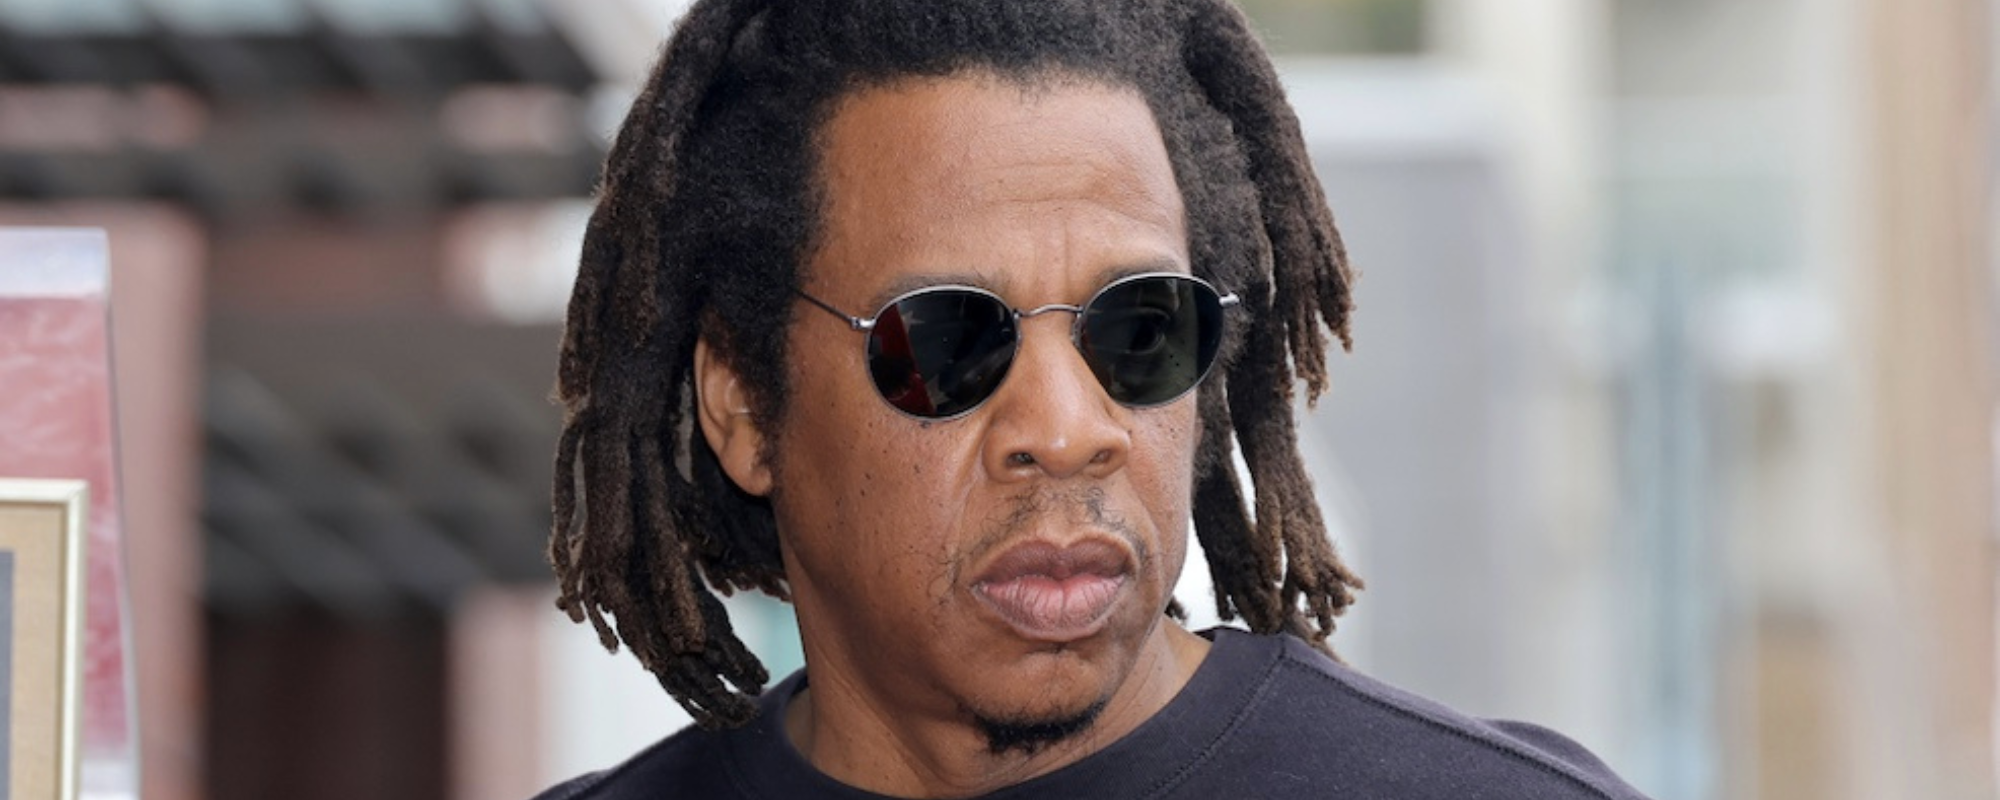 Jay-Z’s Most Controversial Moments